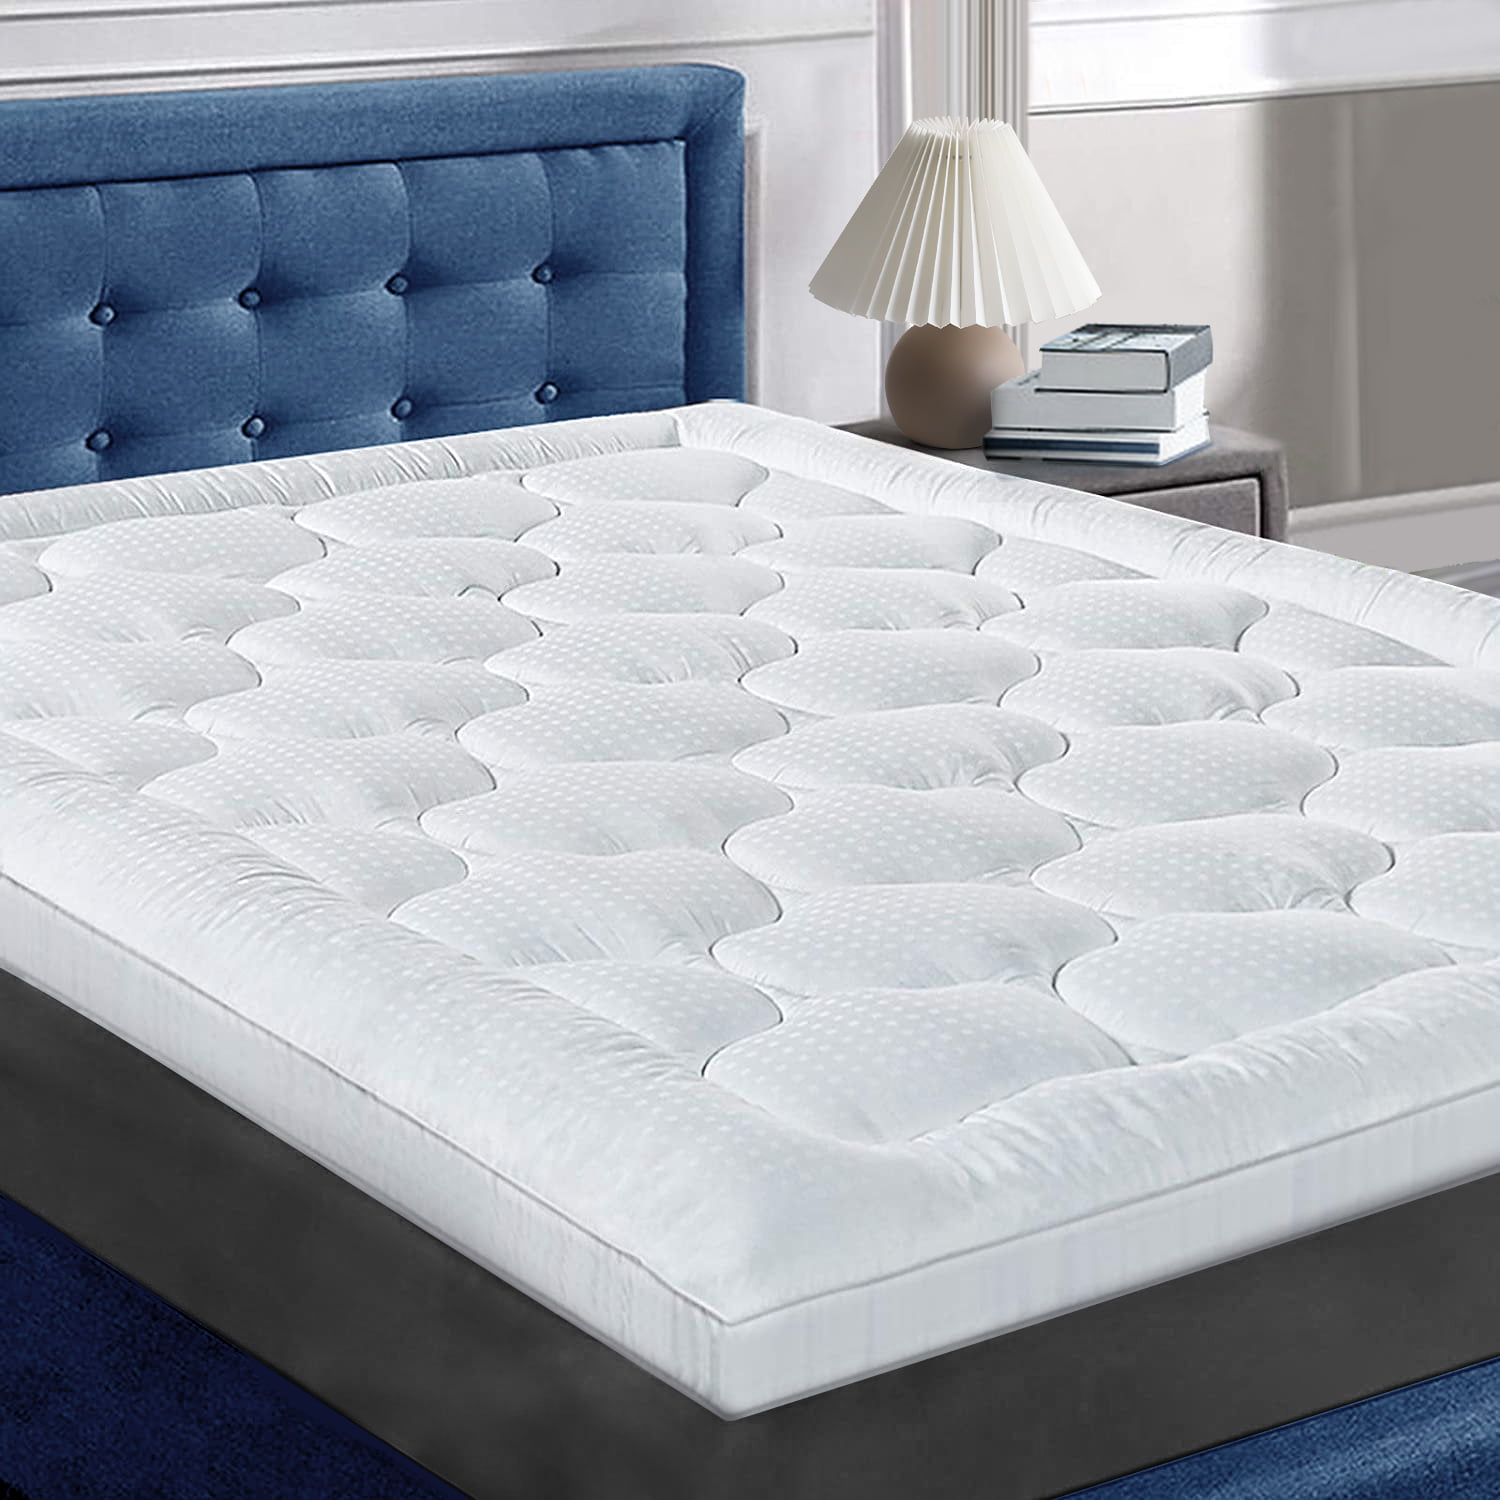 Details about   Cooling Mattress Pad Cotton Pillowtop Overfilled Snow Down Alternative Fit Deep 